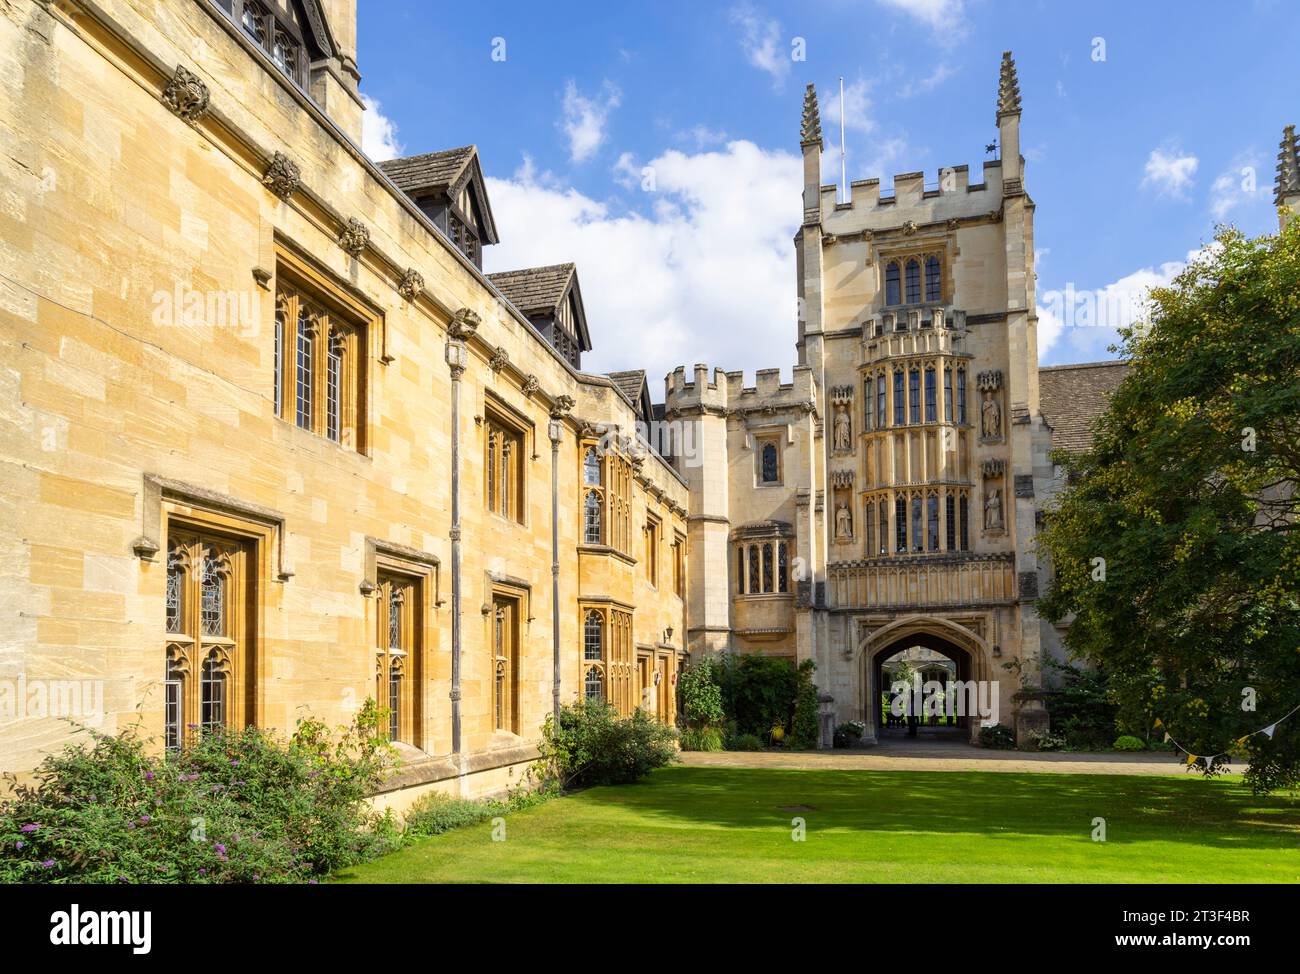 Oxford University Magdalen College Founders tower and Presidents Lodging in St Johns Quad Magdalen College Oxford Oxfordshire England UK GB Europe Stock Photo